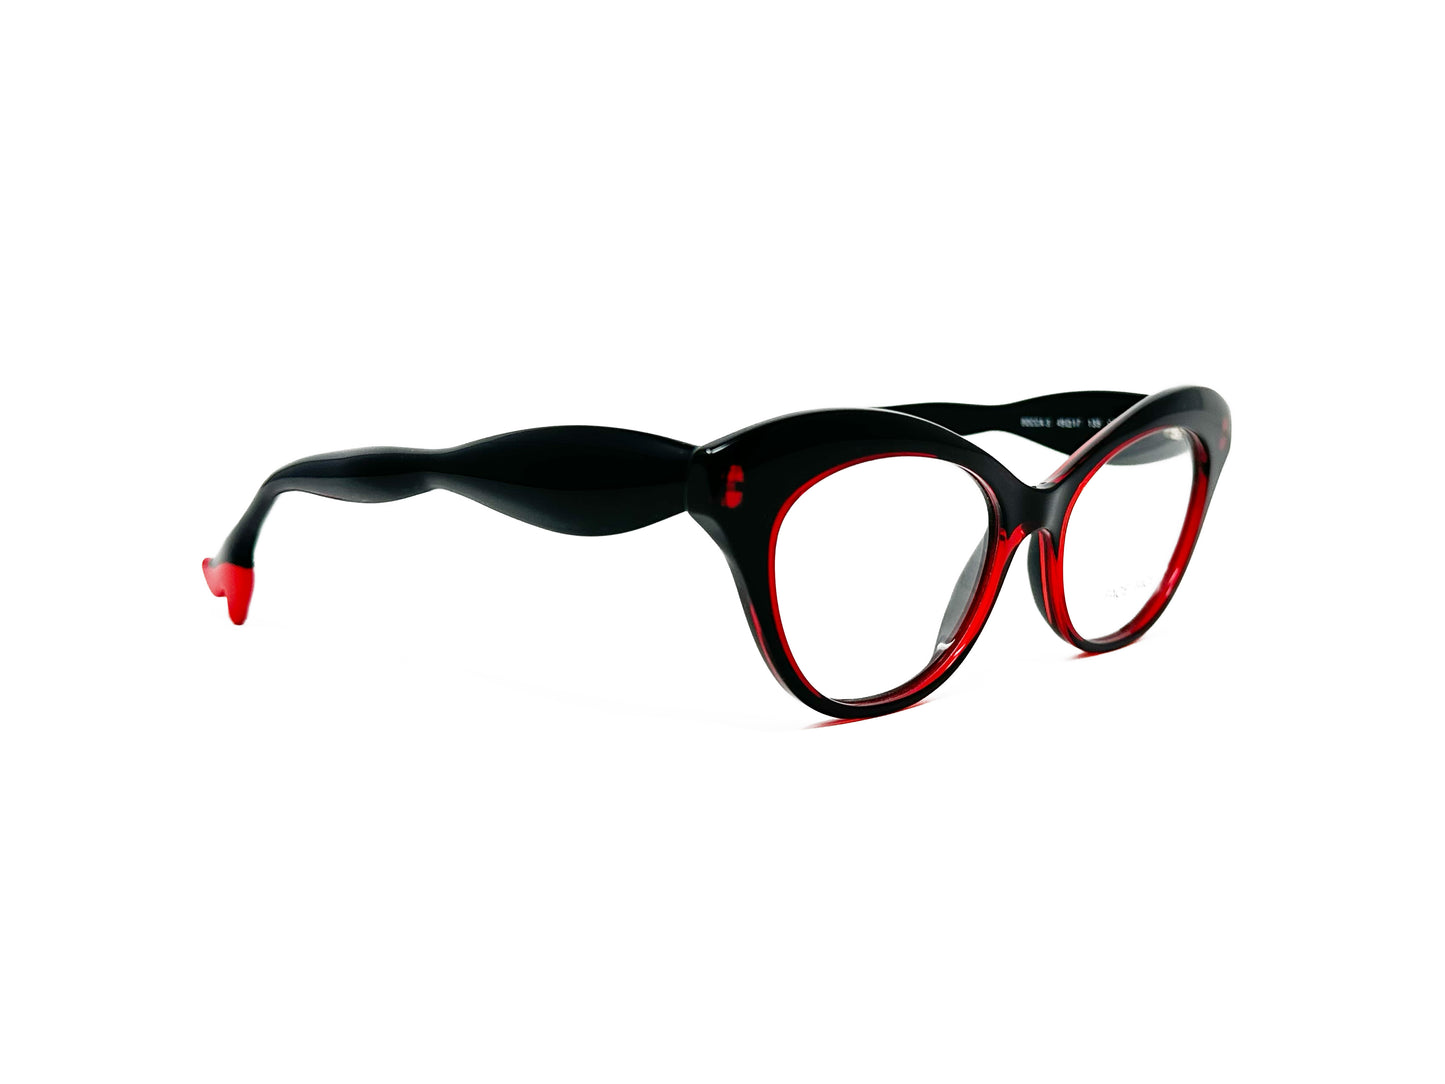 Face a Face acetate, cat-eye optical frame with curved top. Model: Bocca 3. Color: 400 -Black with red temples. End of temple is designed to look like a heel. 3/4th view.